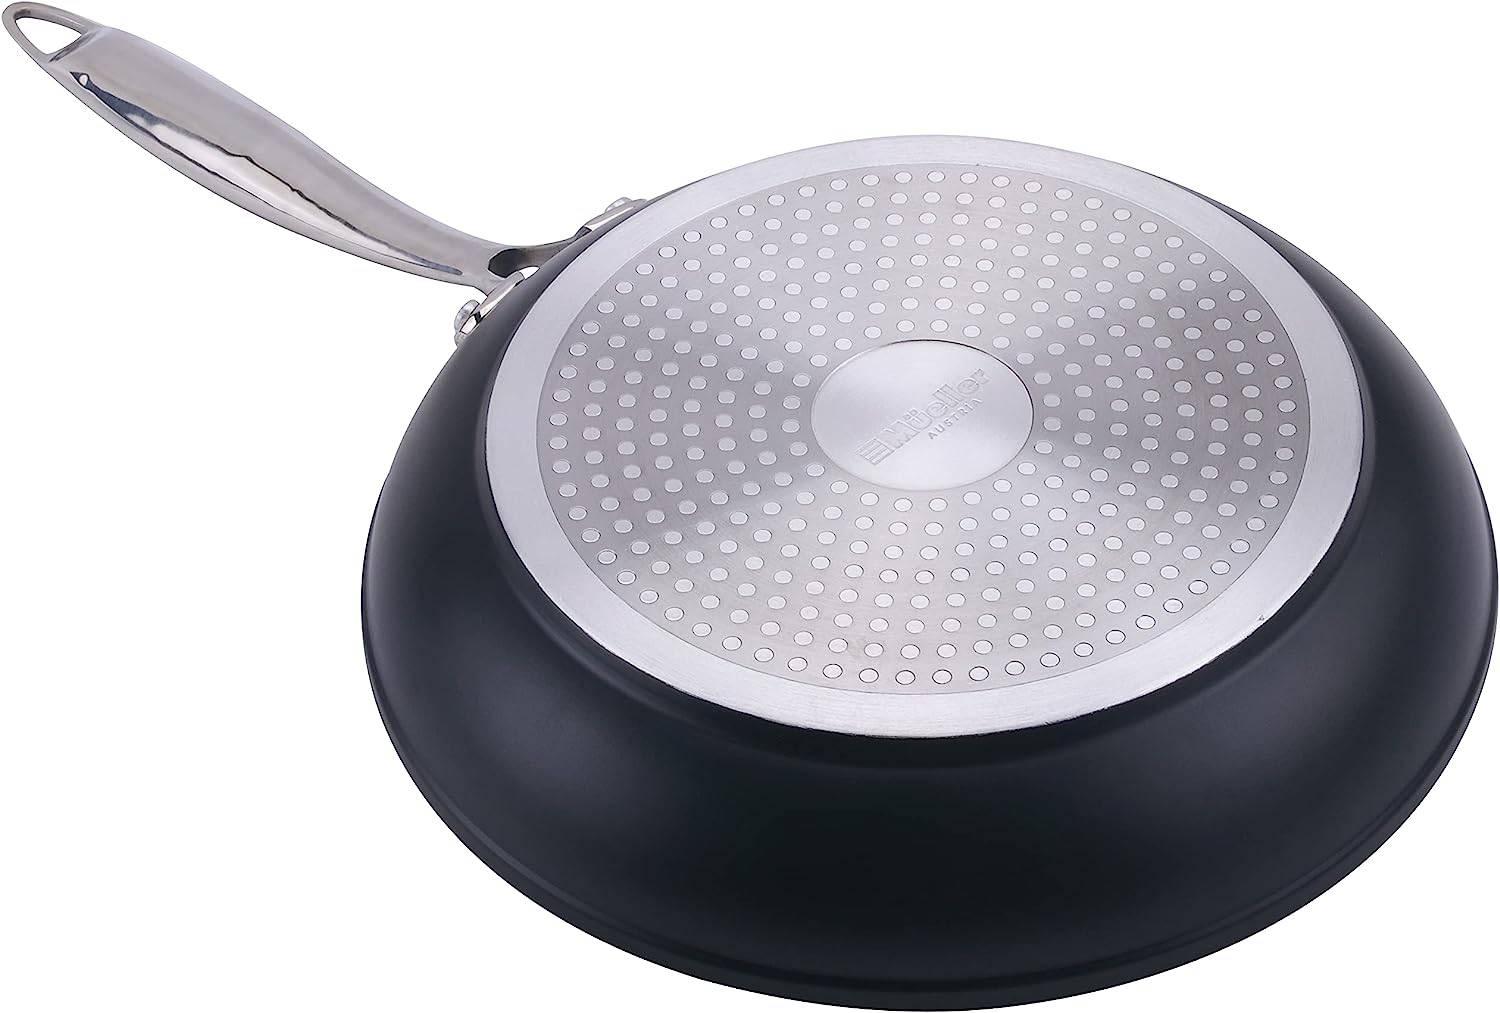 Mueller 10-Inch Non Stick Frying Pans, No PFOA or Apeo, Heavy Duty German Stone Coating Cookware, Aluminum Body, Evercool Stainless Steel Handle,Black